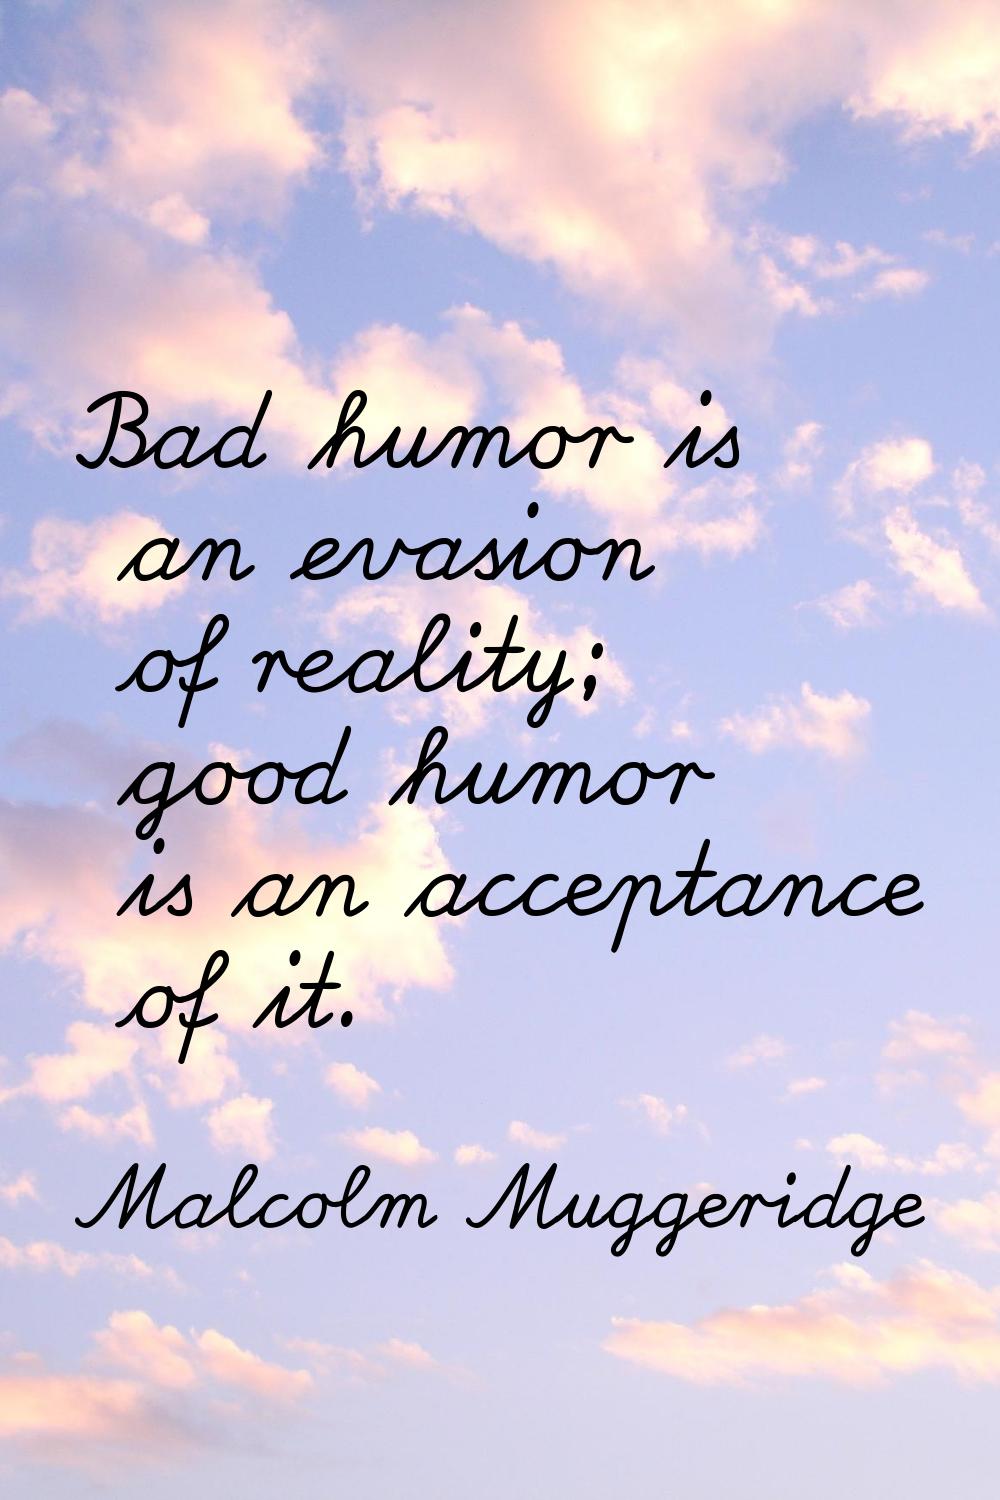 Bad humor is an evasion of reality; good humor is an acceptance of it.